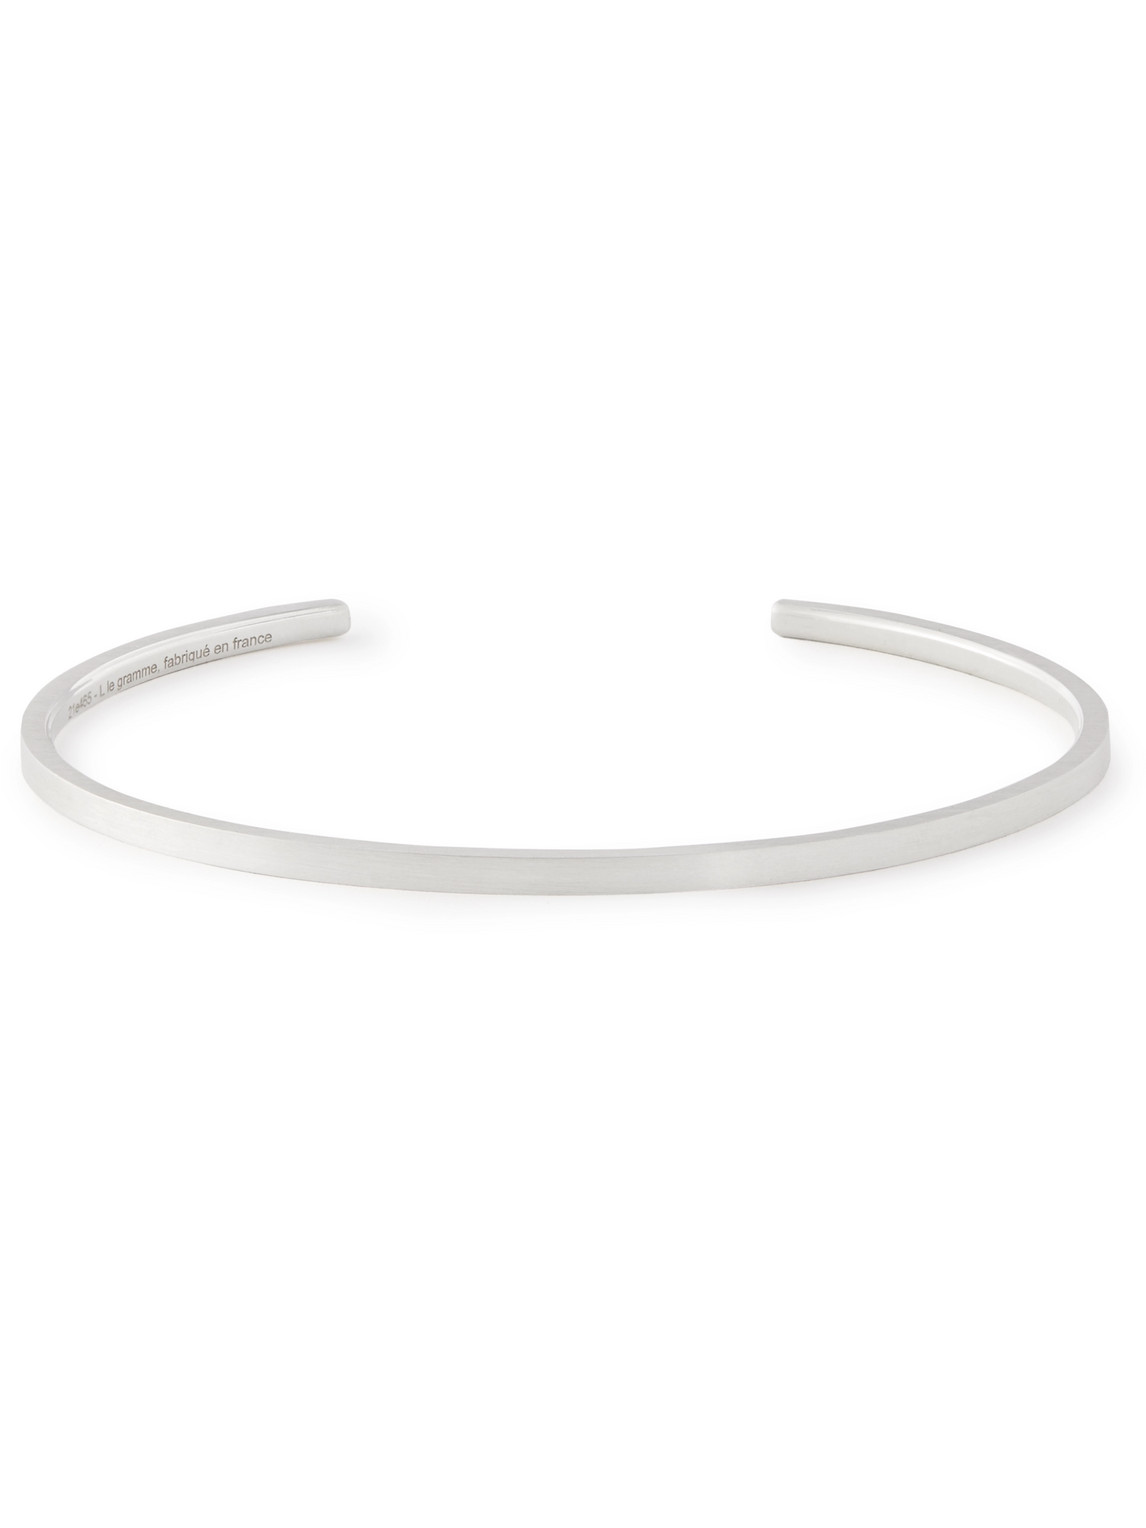 Shop Le Gramme 7g Brushed Sterling Silver Cuff